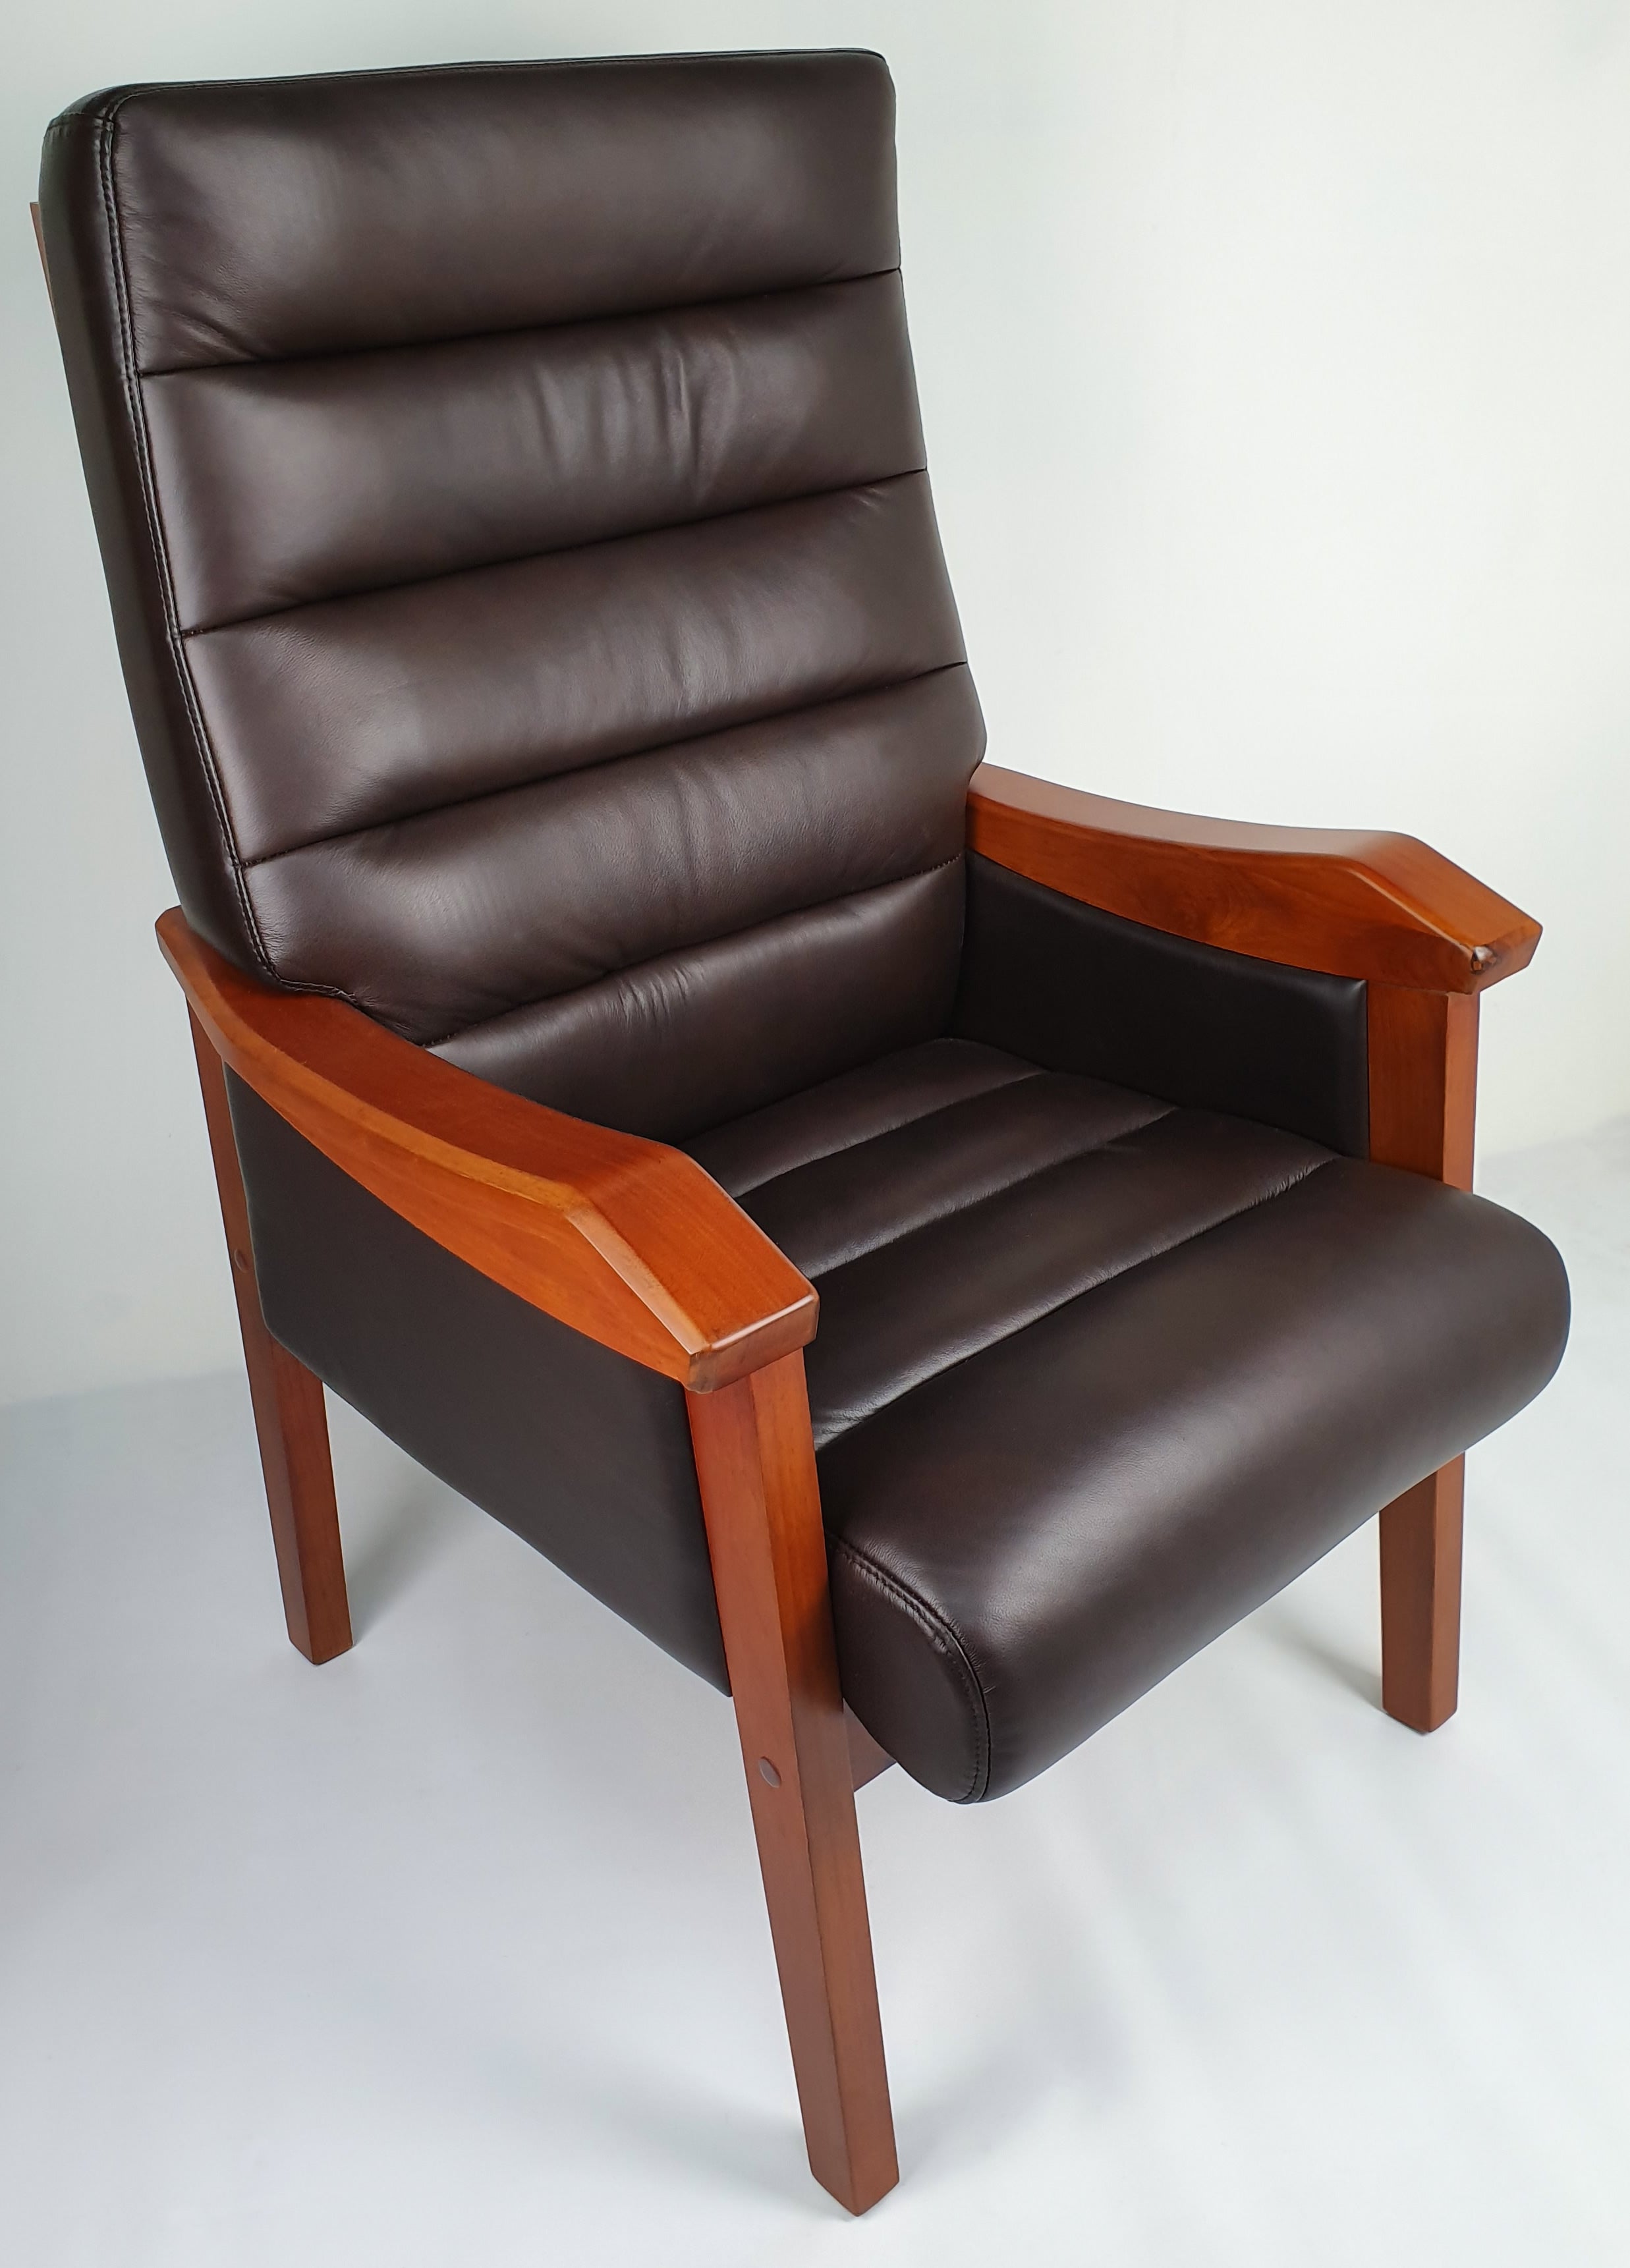 Senato CHA-FK8C Visitor Chair Brown Leather with Teak Frame North Yorkshire